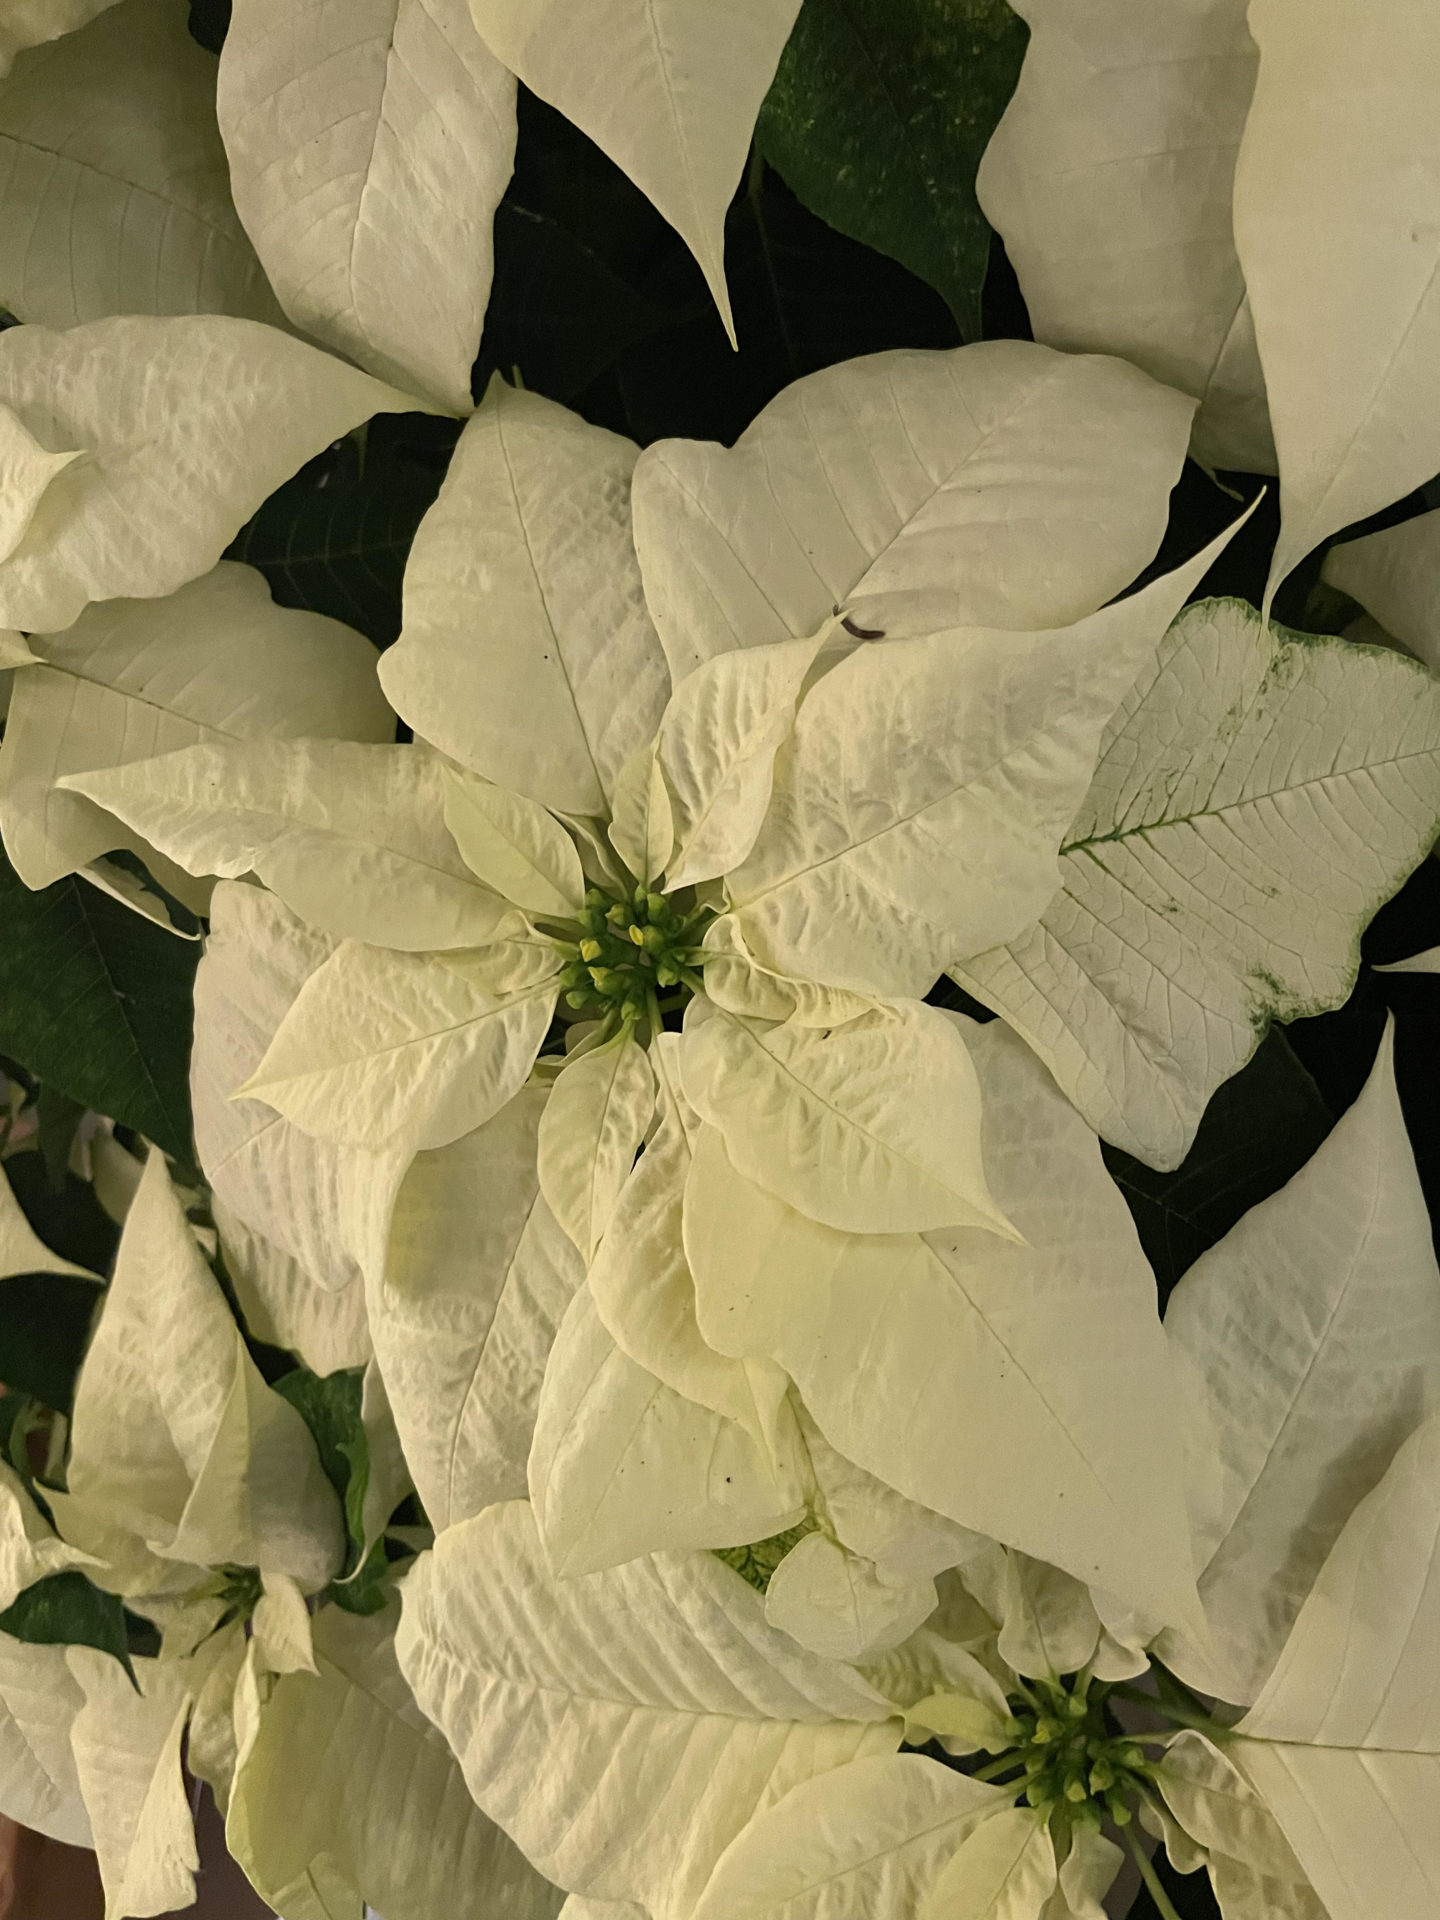 Poinsettias bloom white and green in the greenhouse at Naumkeag in Winterlights.